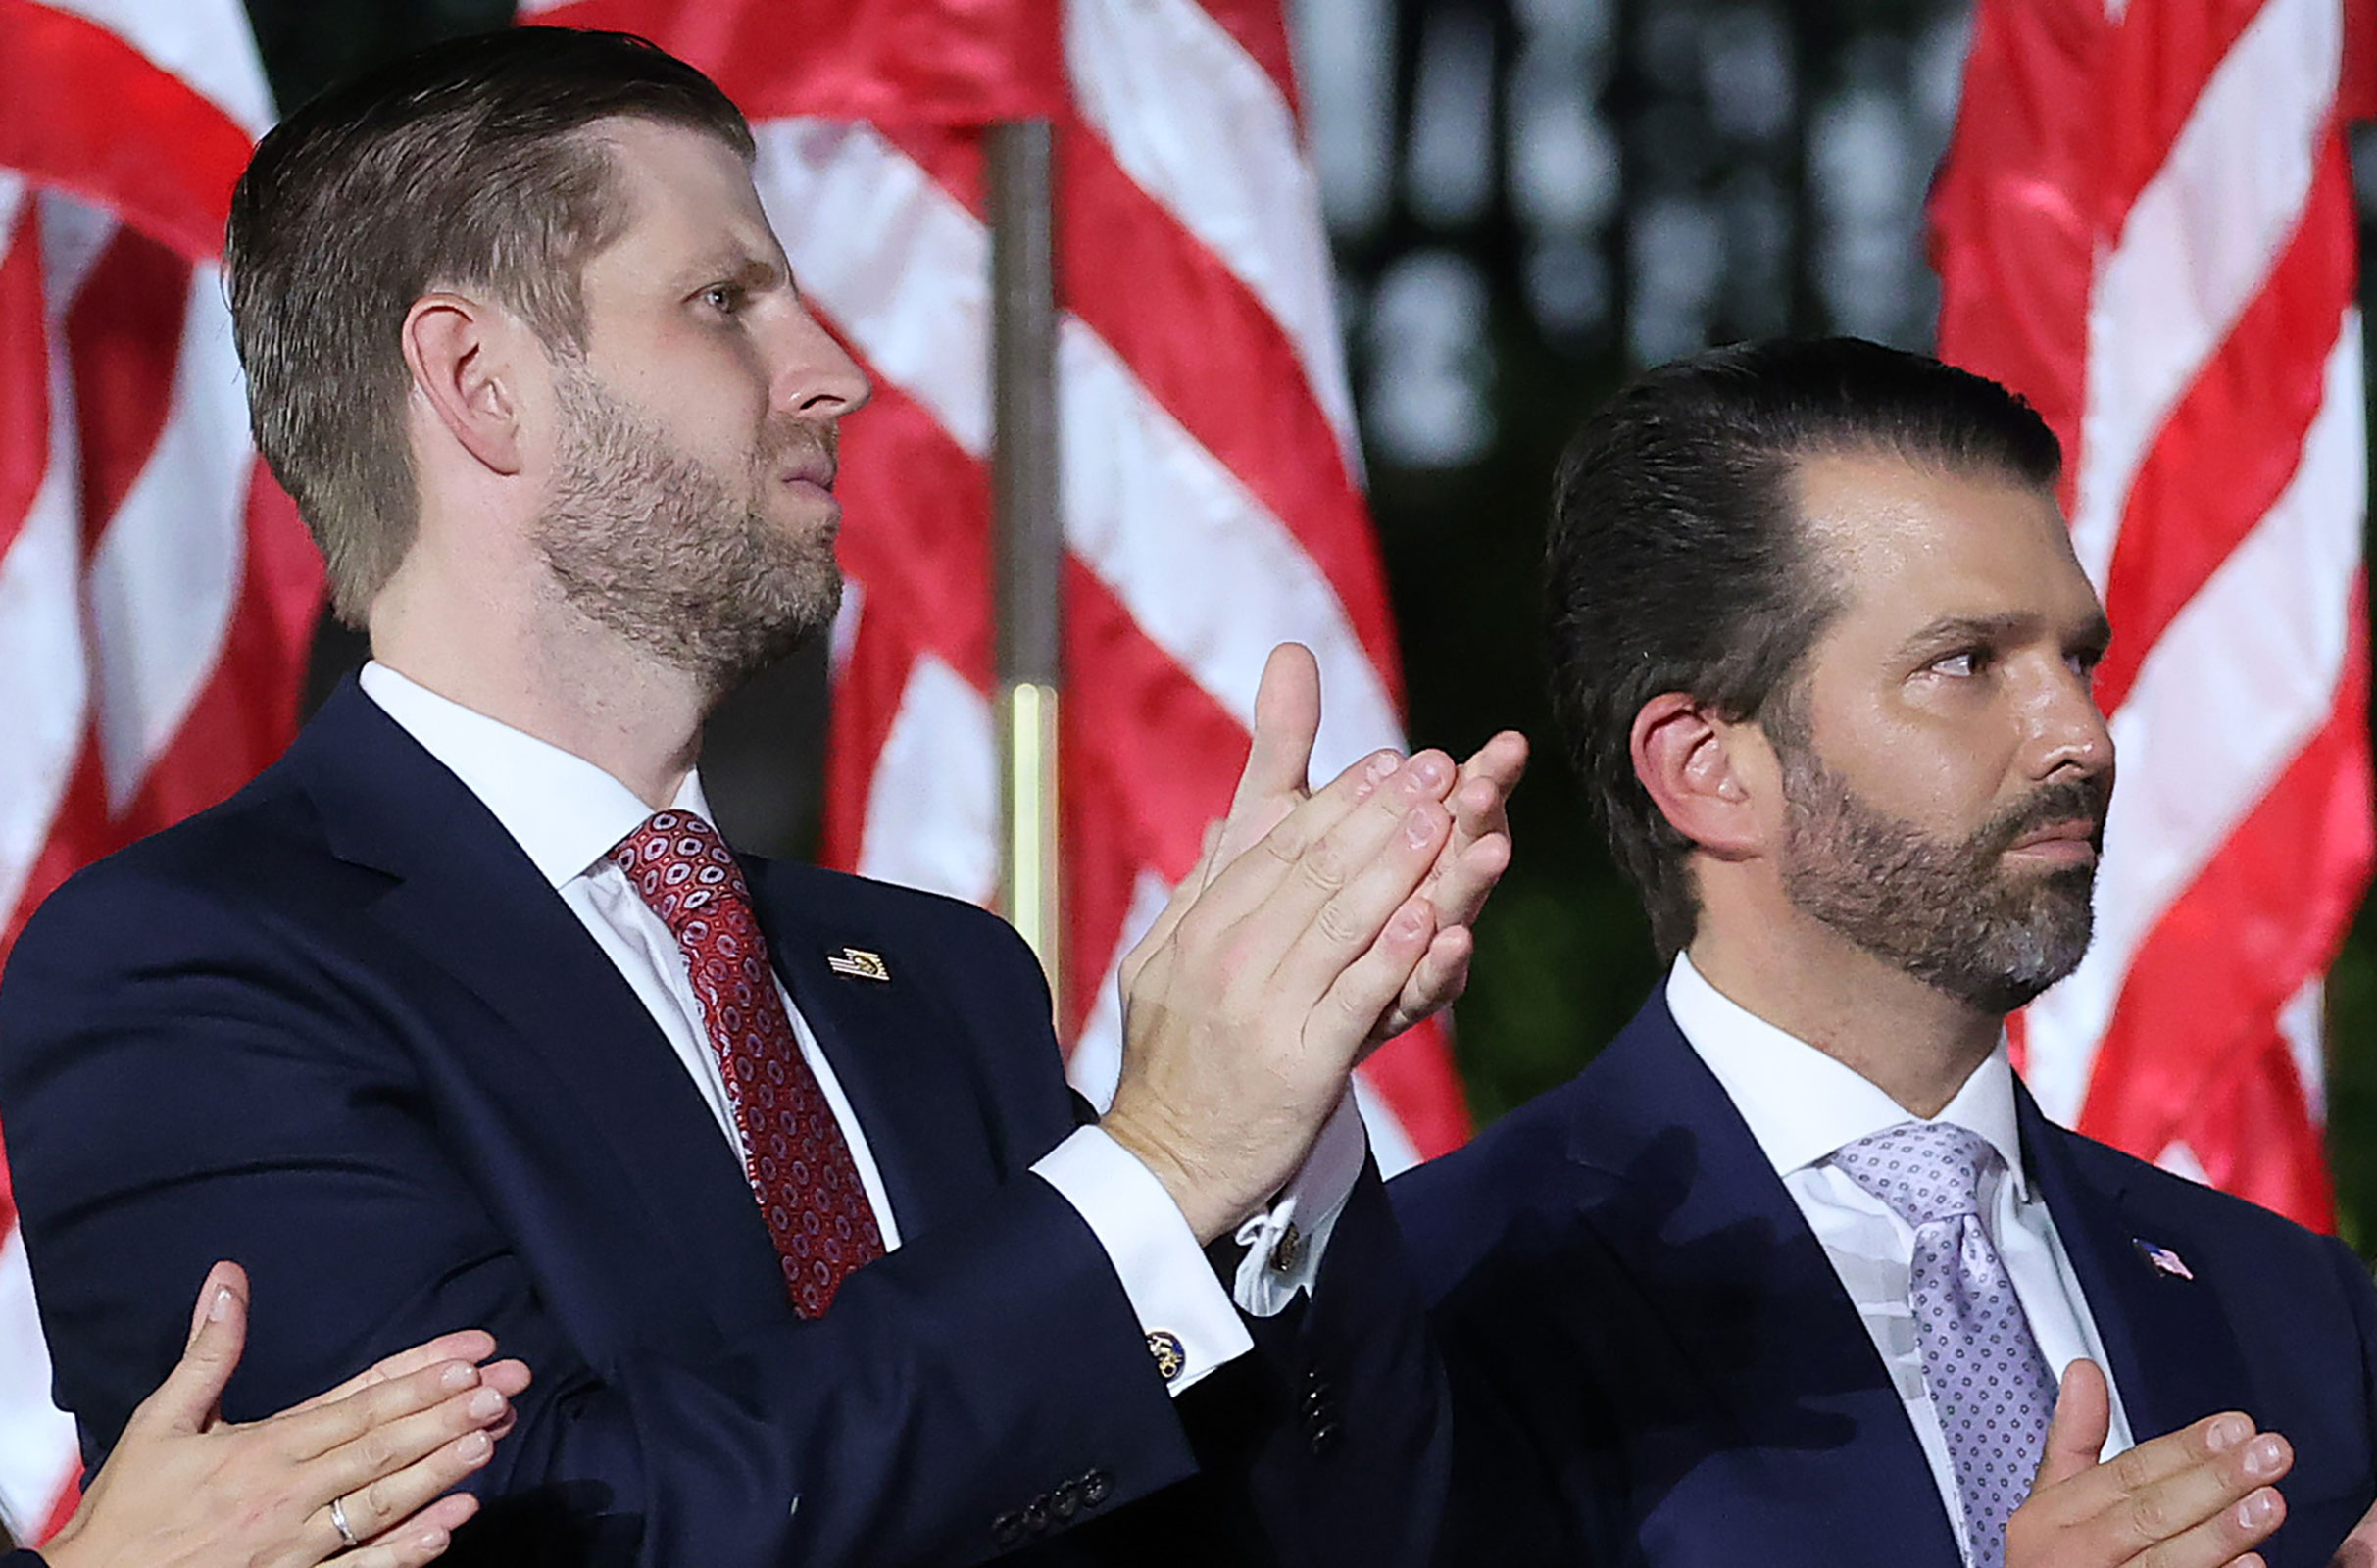 Eric Trump and Donald Trump Jr. in August 2020 in Washington, DC.